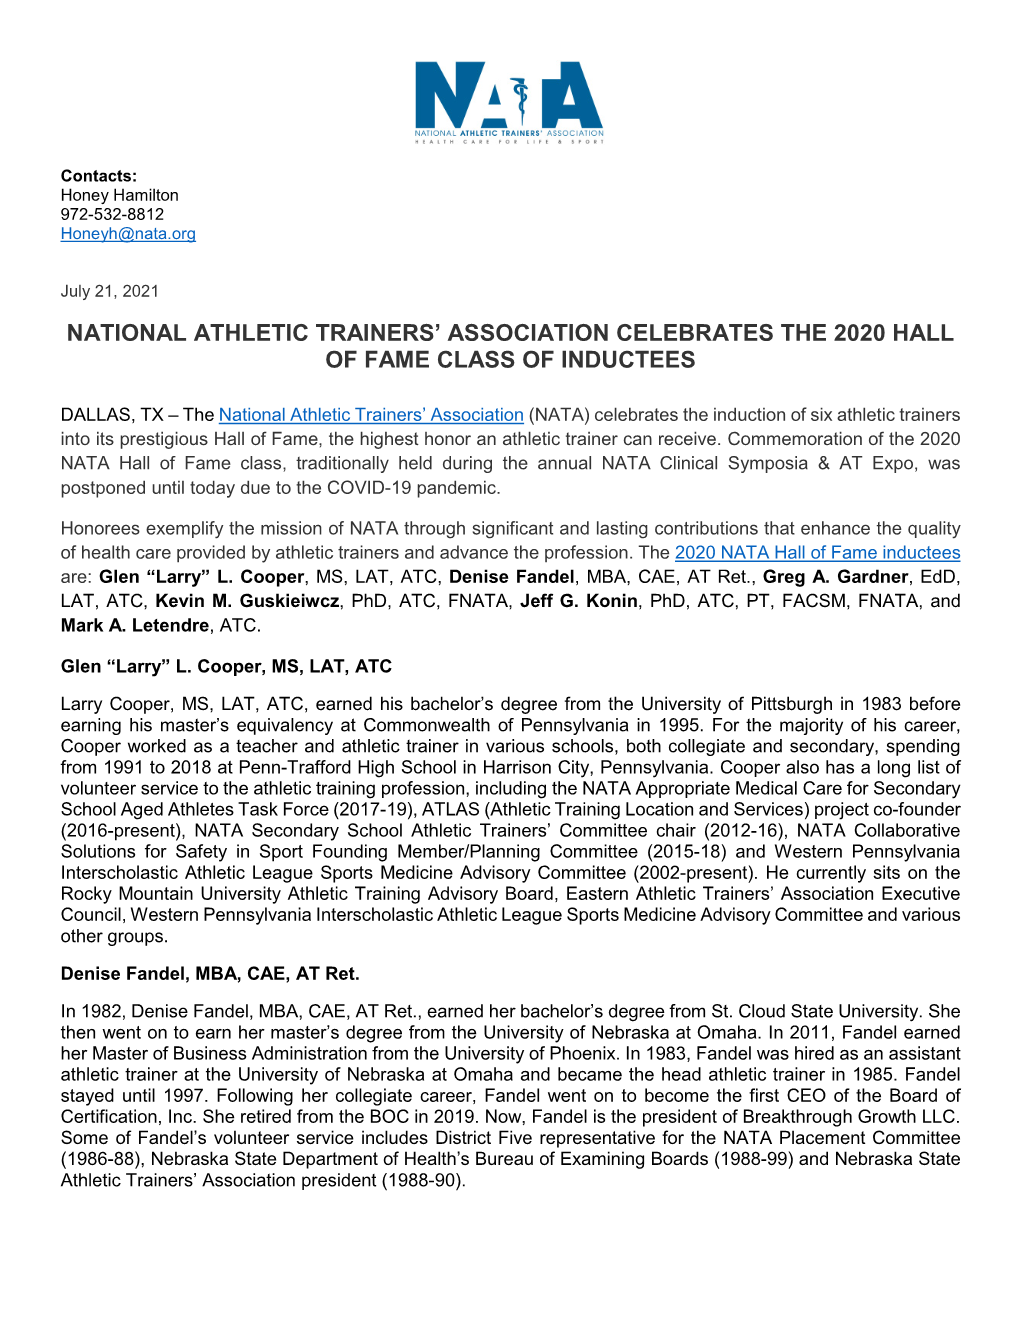 National Athletic Trainers' Association Represents and Supports More Than 40,000 Members of the Athletic Training Profession